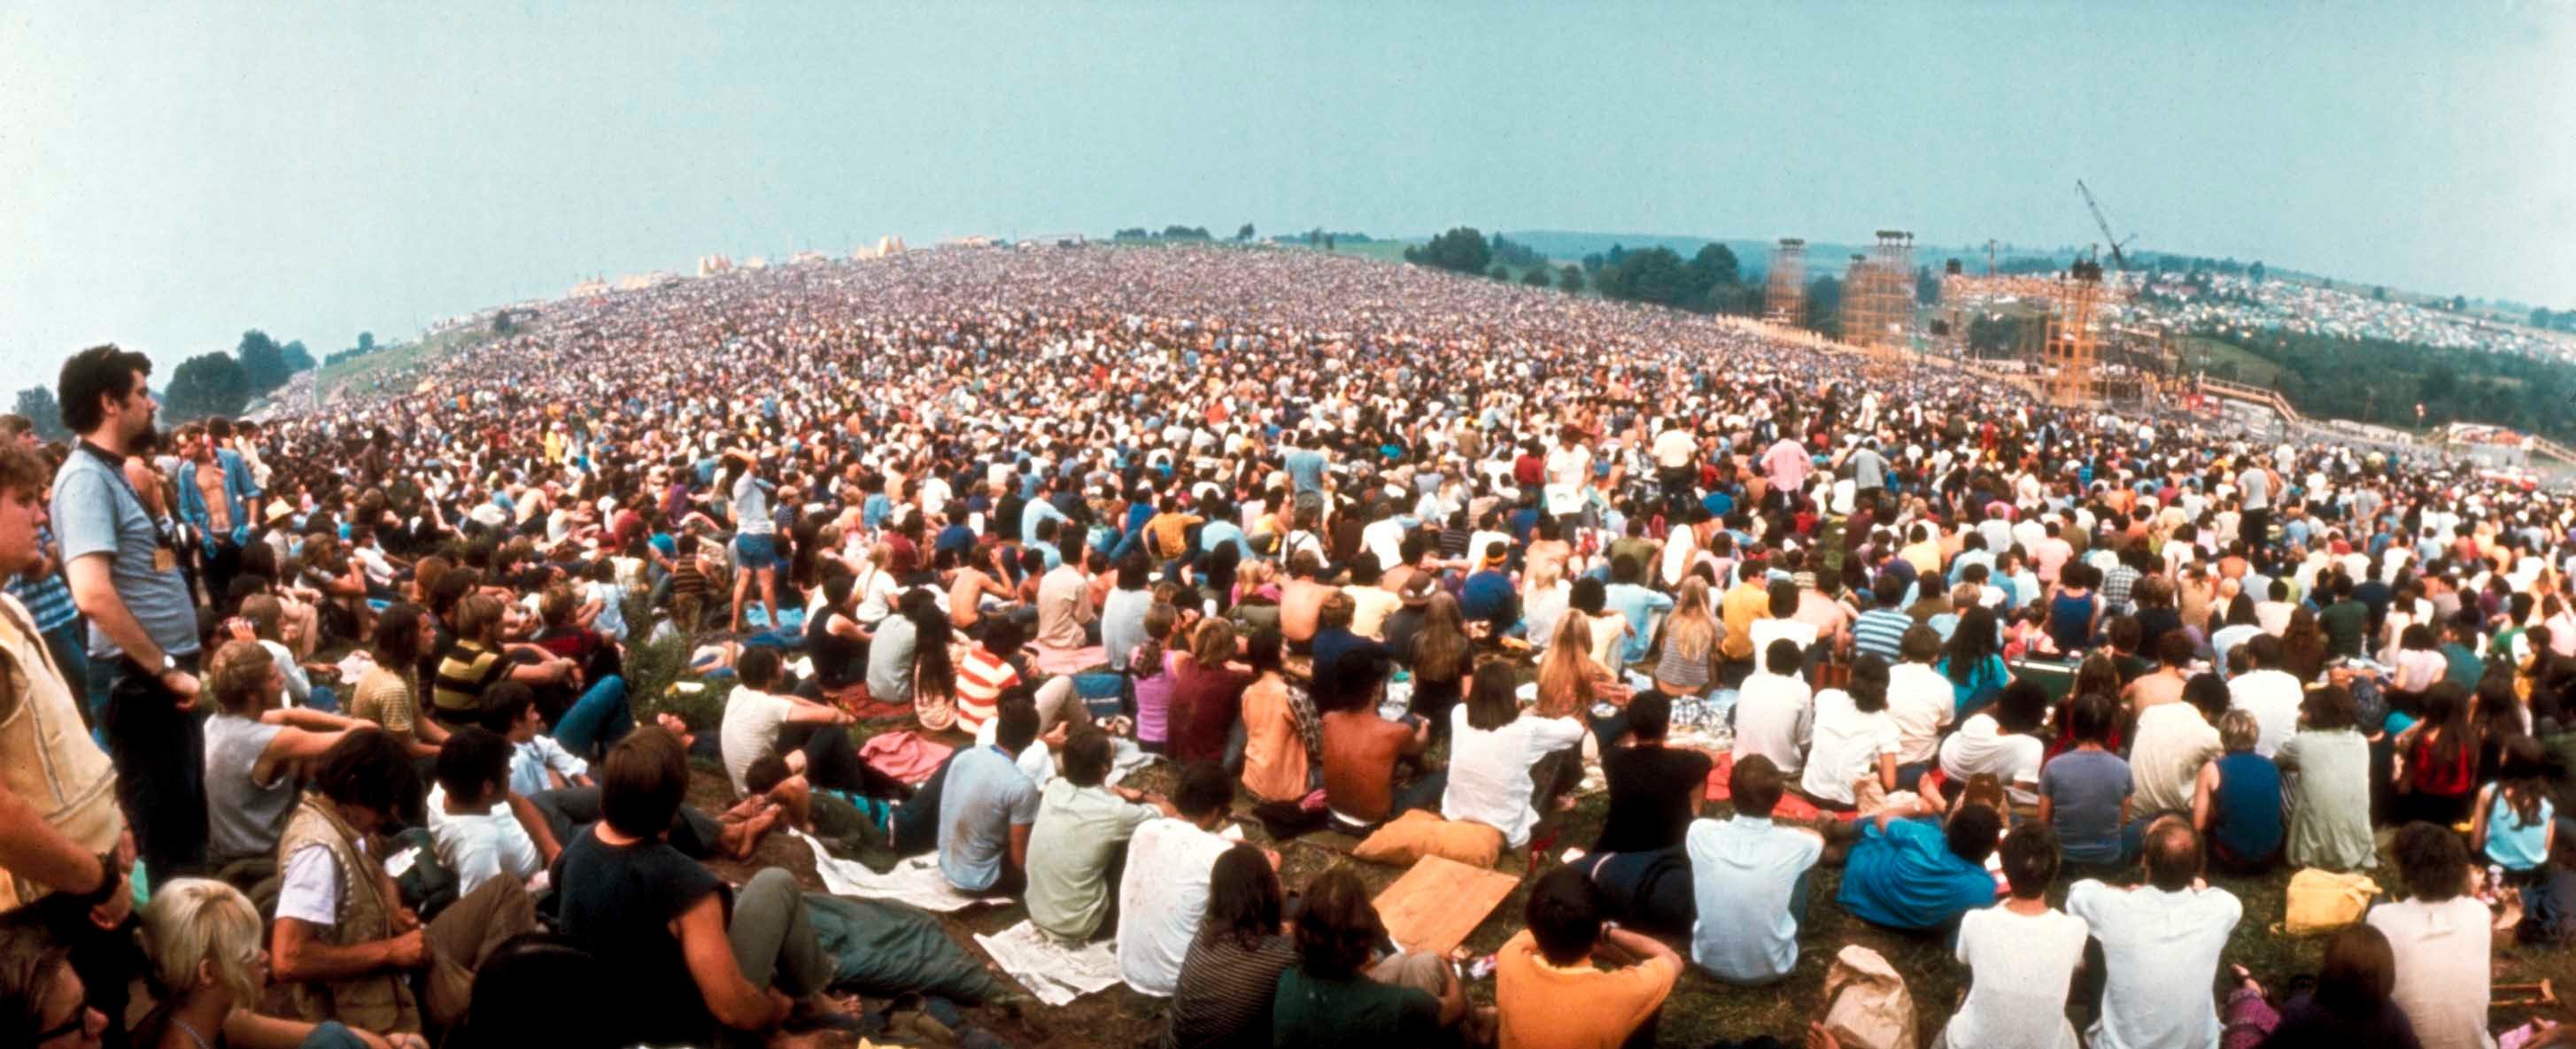 Official Woodstock 50th Anniversary Festival Location & Date Confirmed